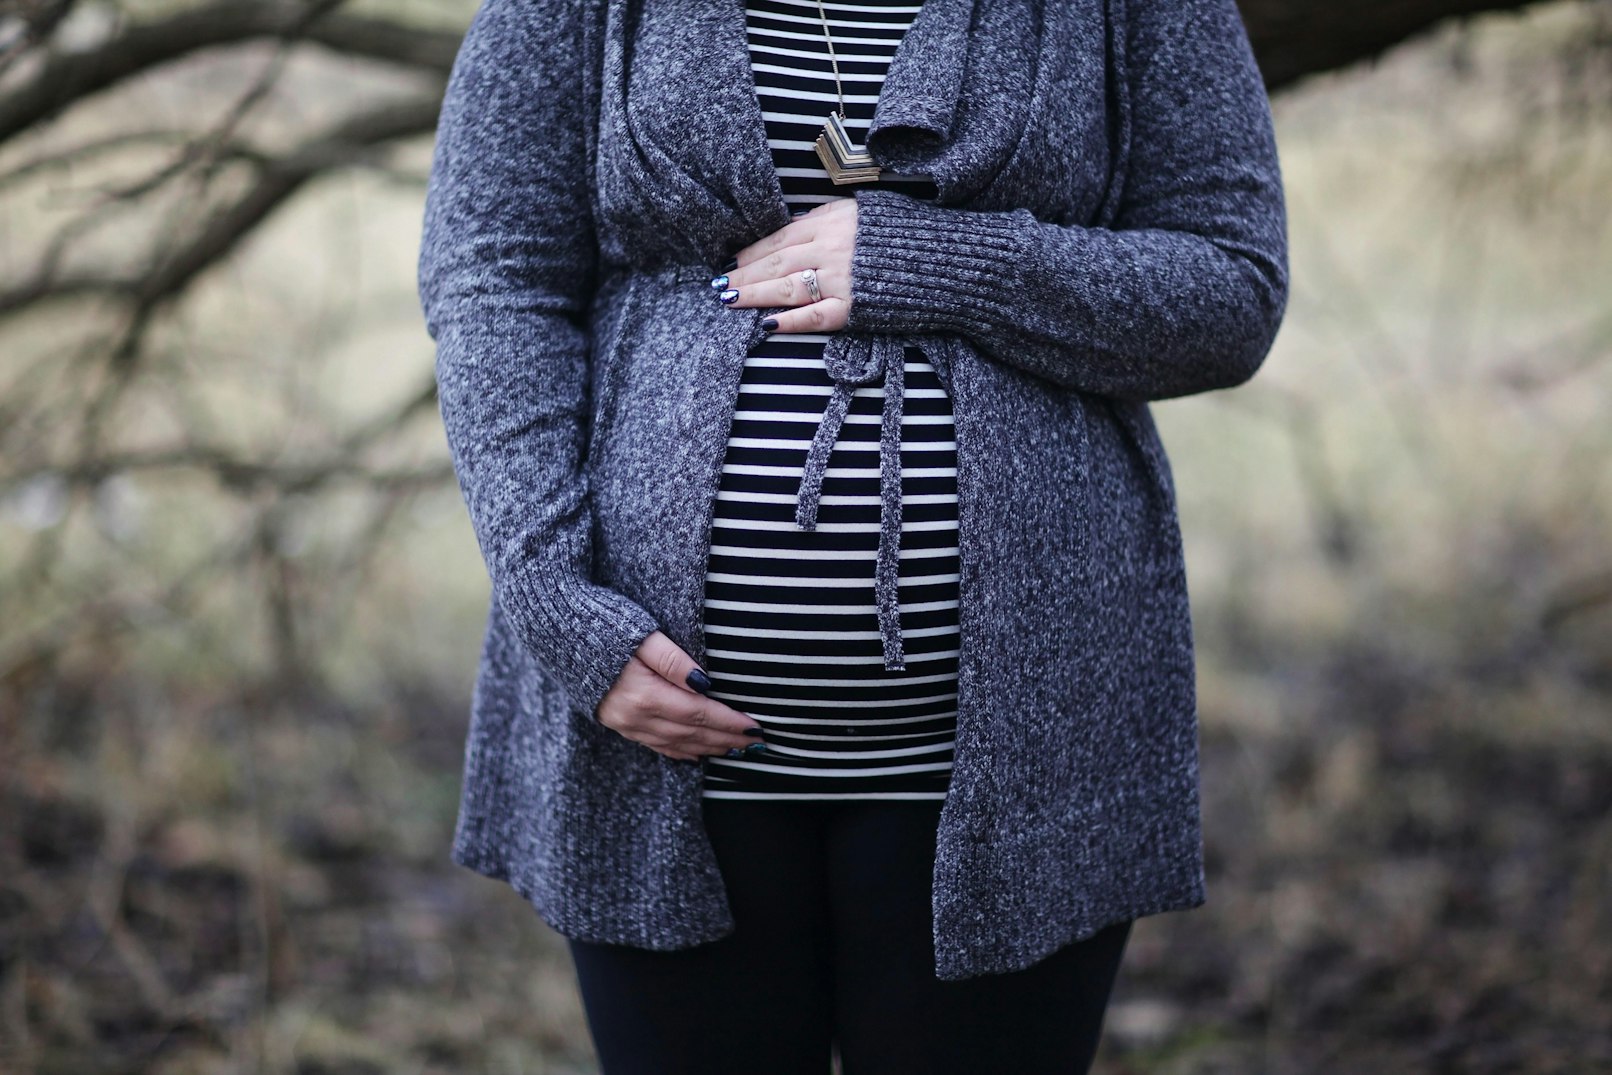 Woman pregnant in black and white striped shirt standing 952597 1